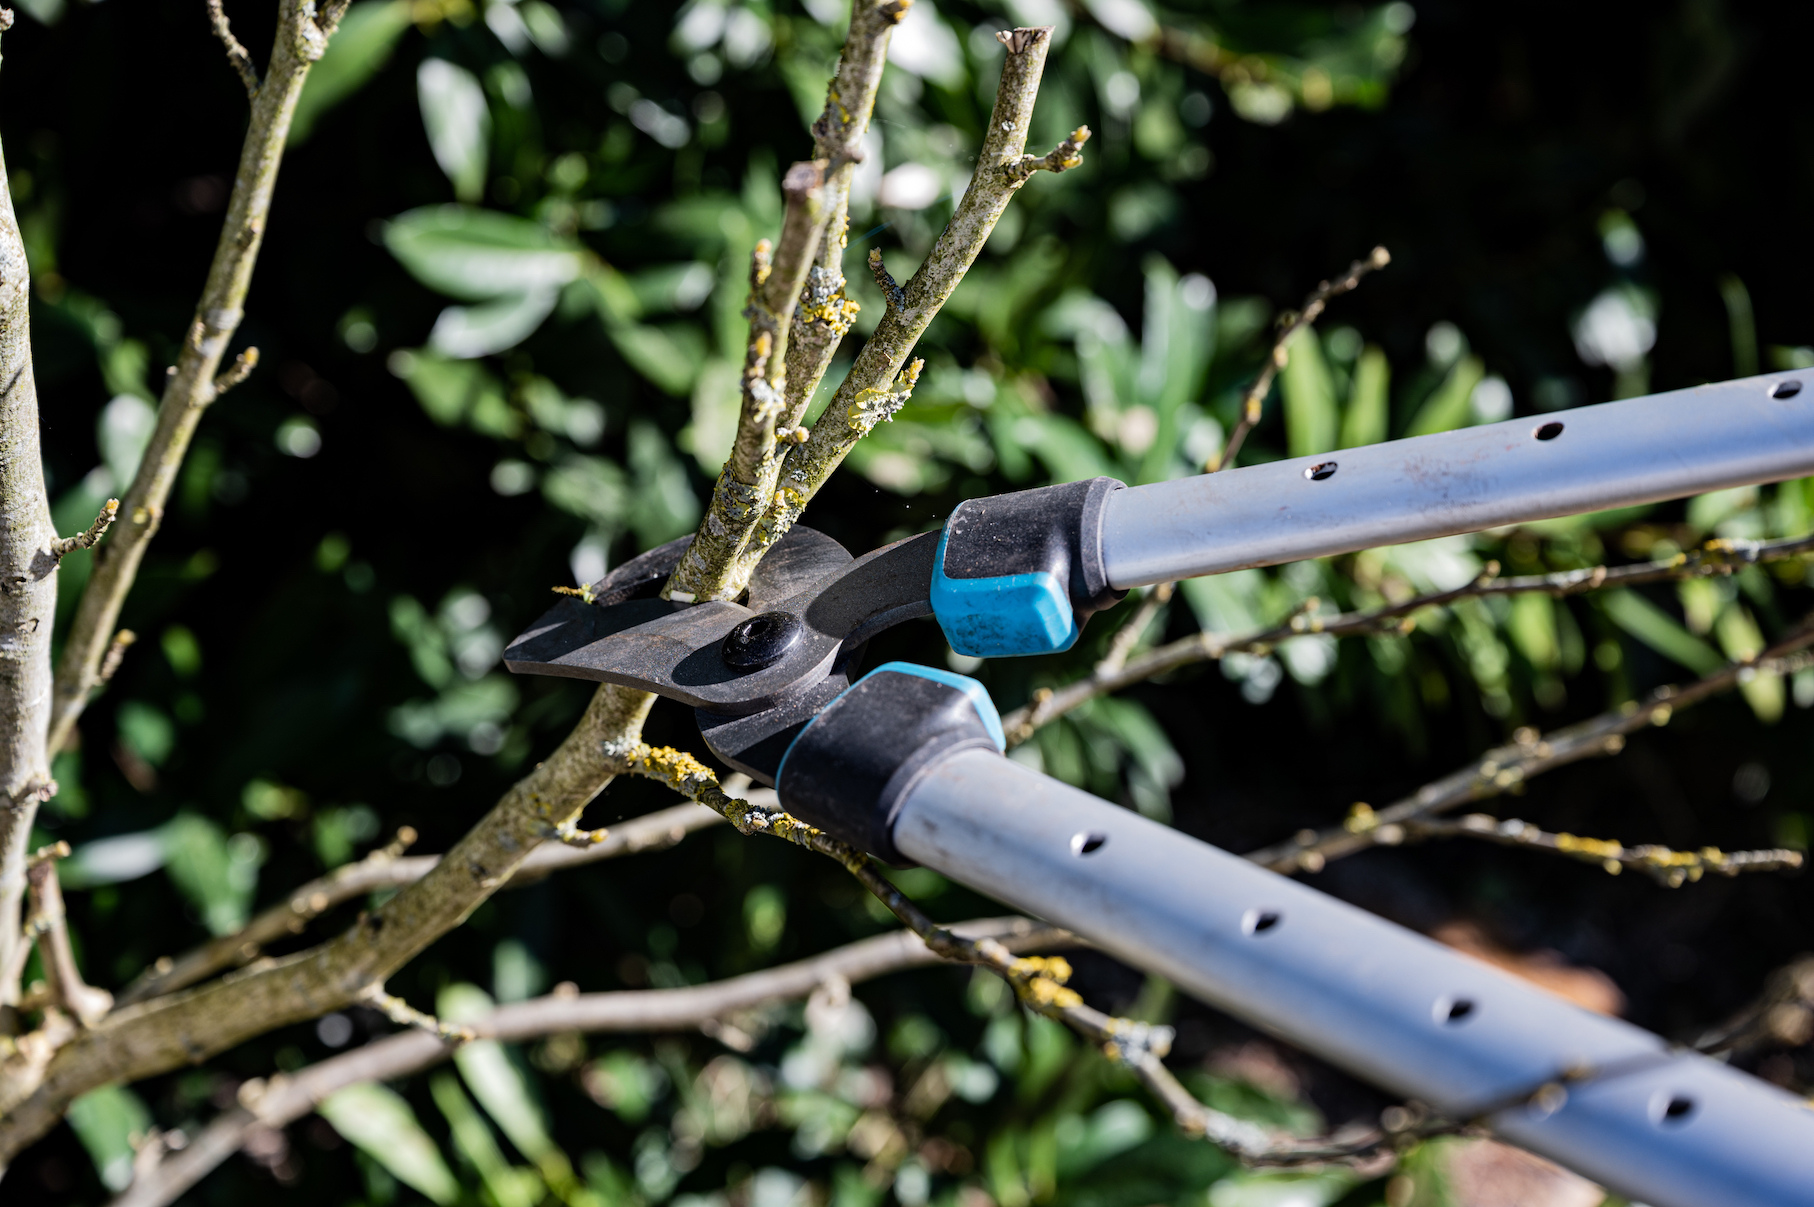 FREE PRUNING COURSE WITH THE CIRCEO PARK EXPERTS